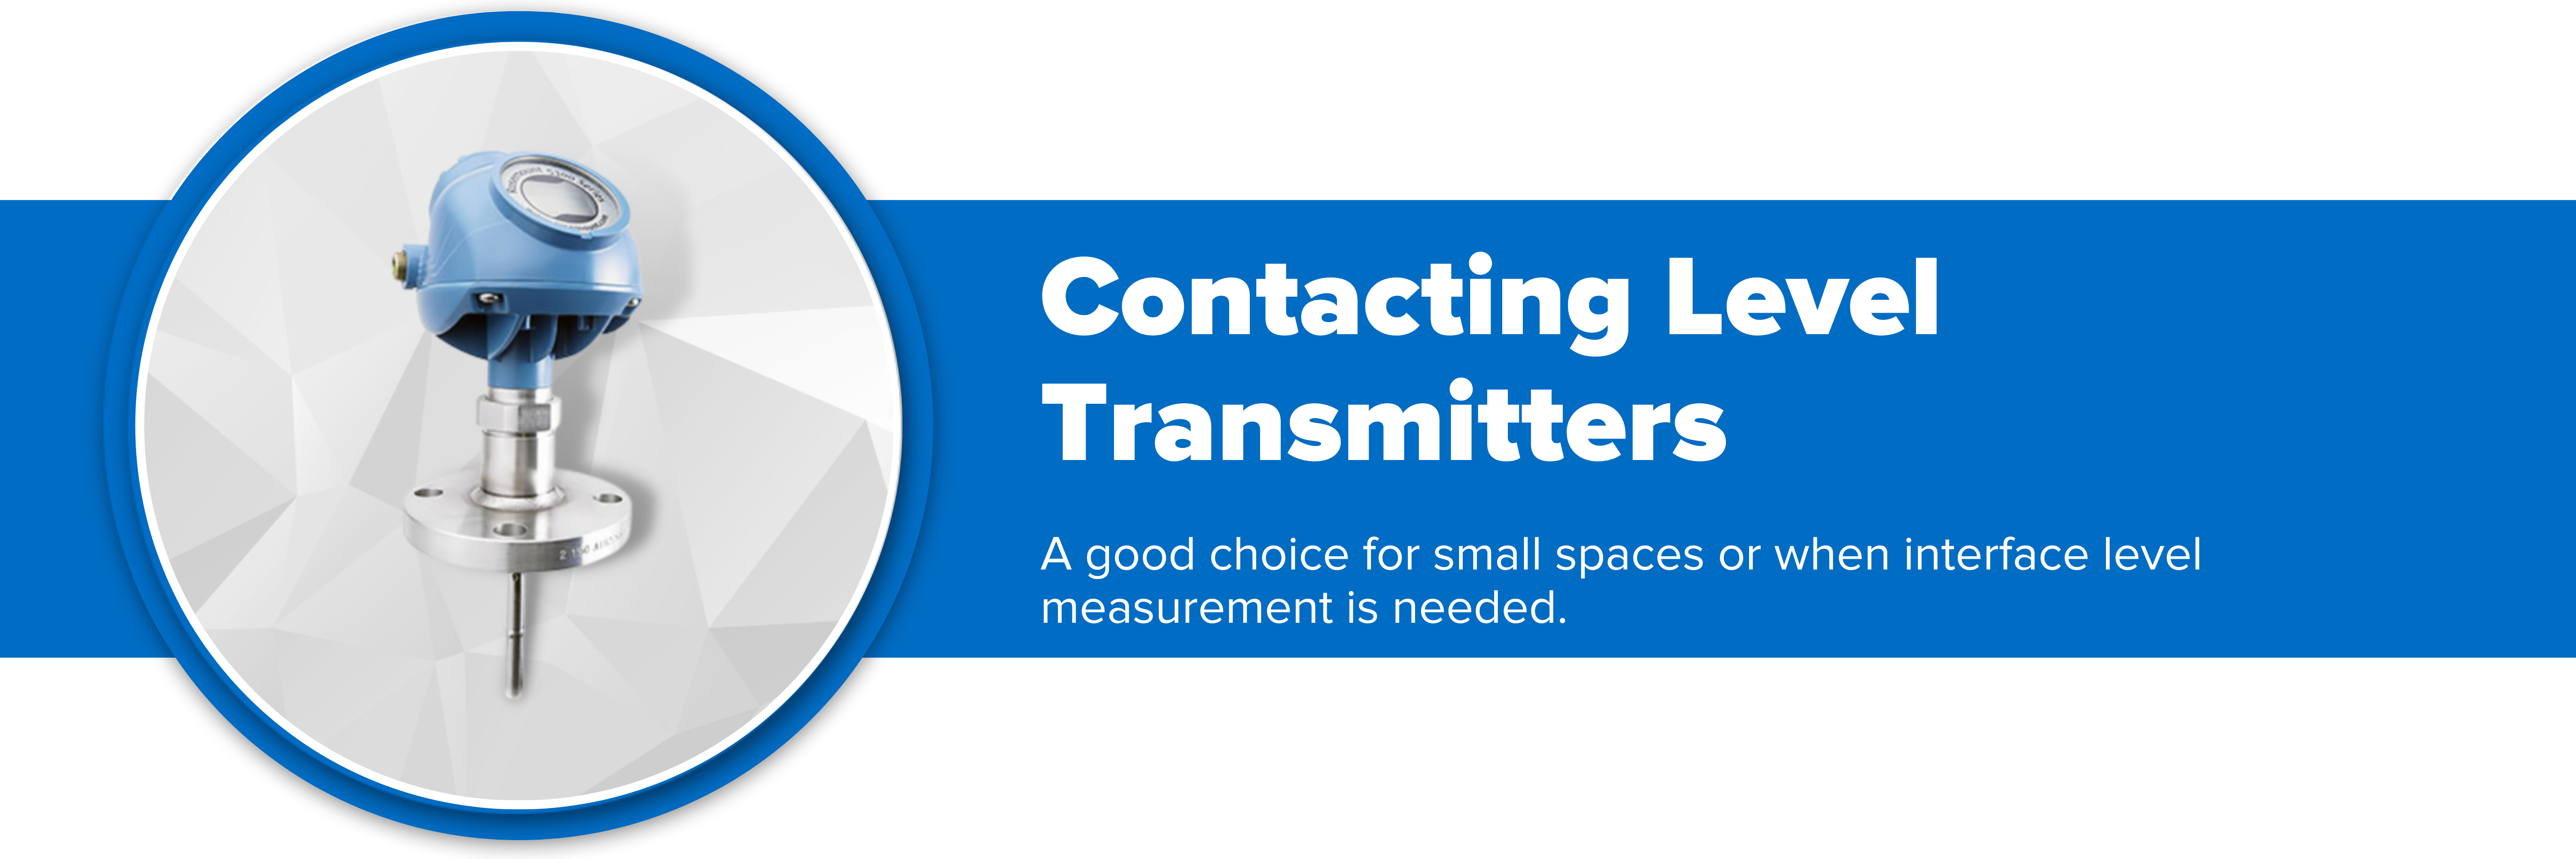 Header image with text "Contacting Level Transmitters"